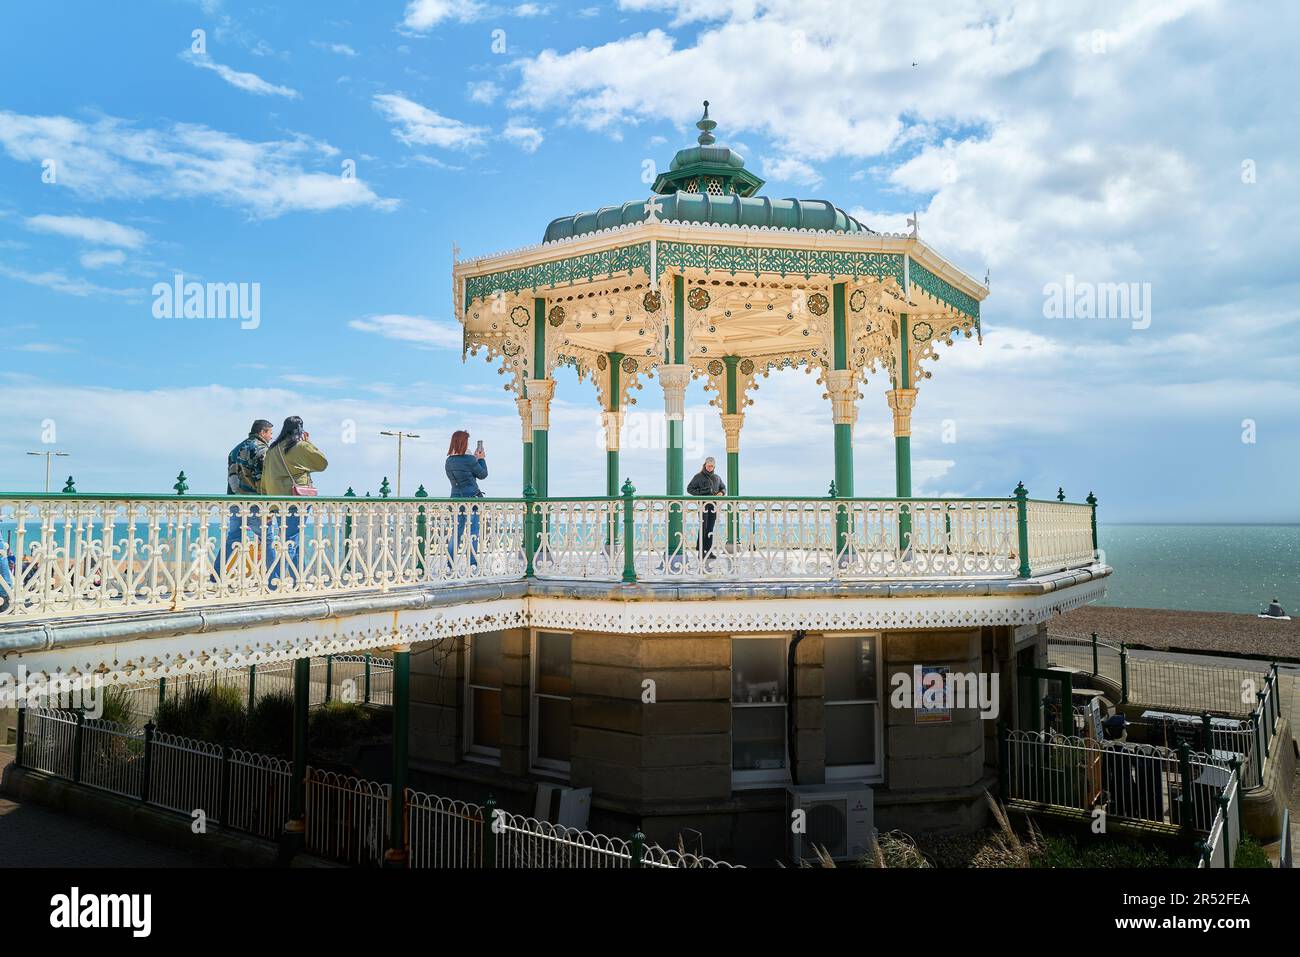 Visitors on the bandstand (known as the birdcage) at the promenade at Brighton and Hove, south coast of England. Stock Photo